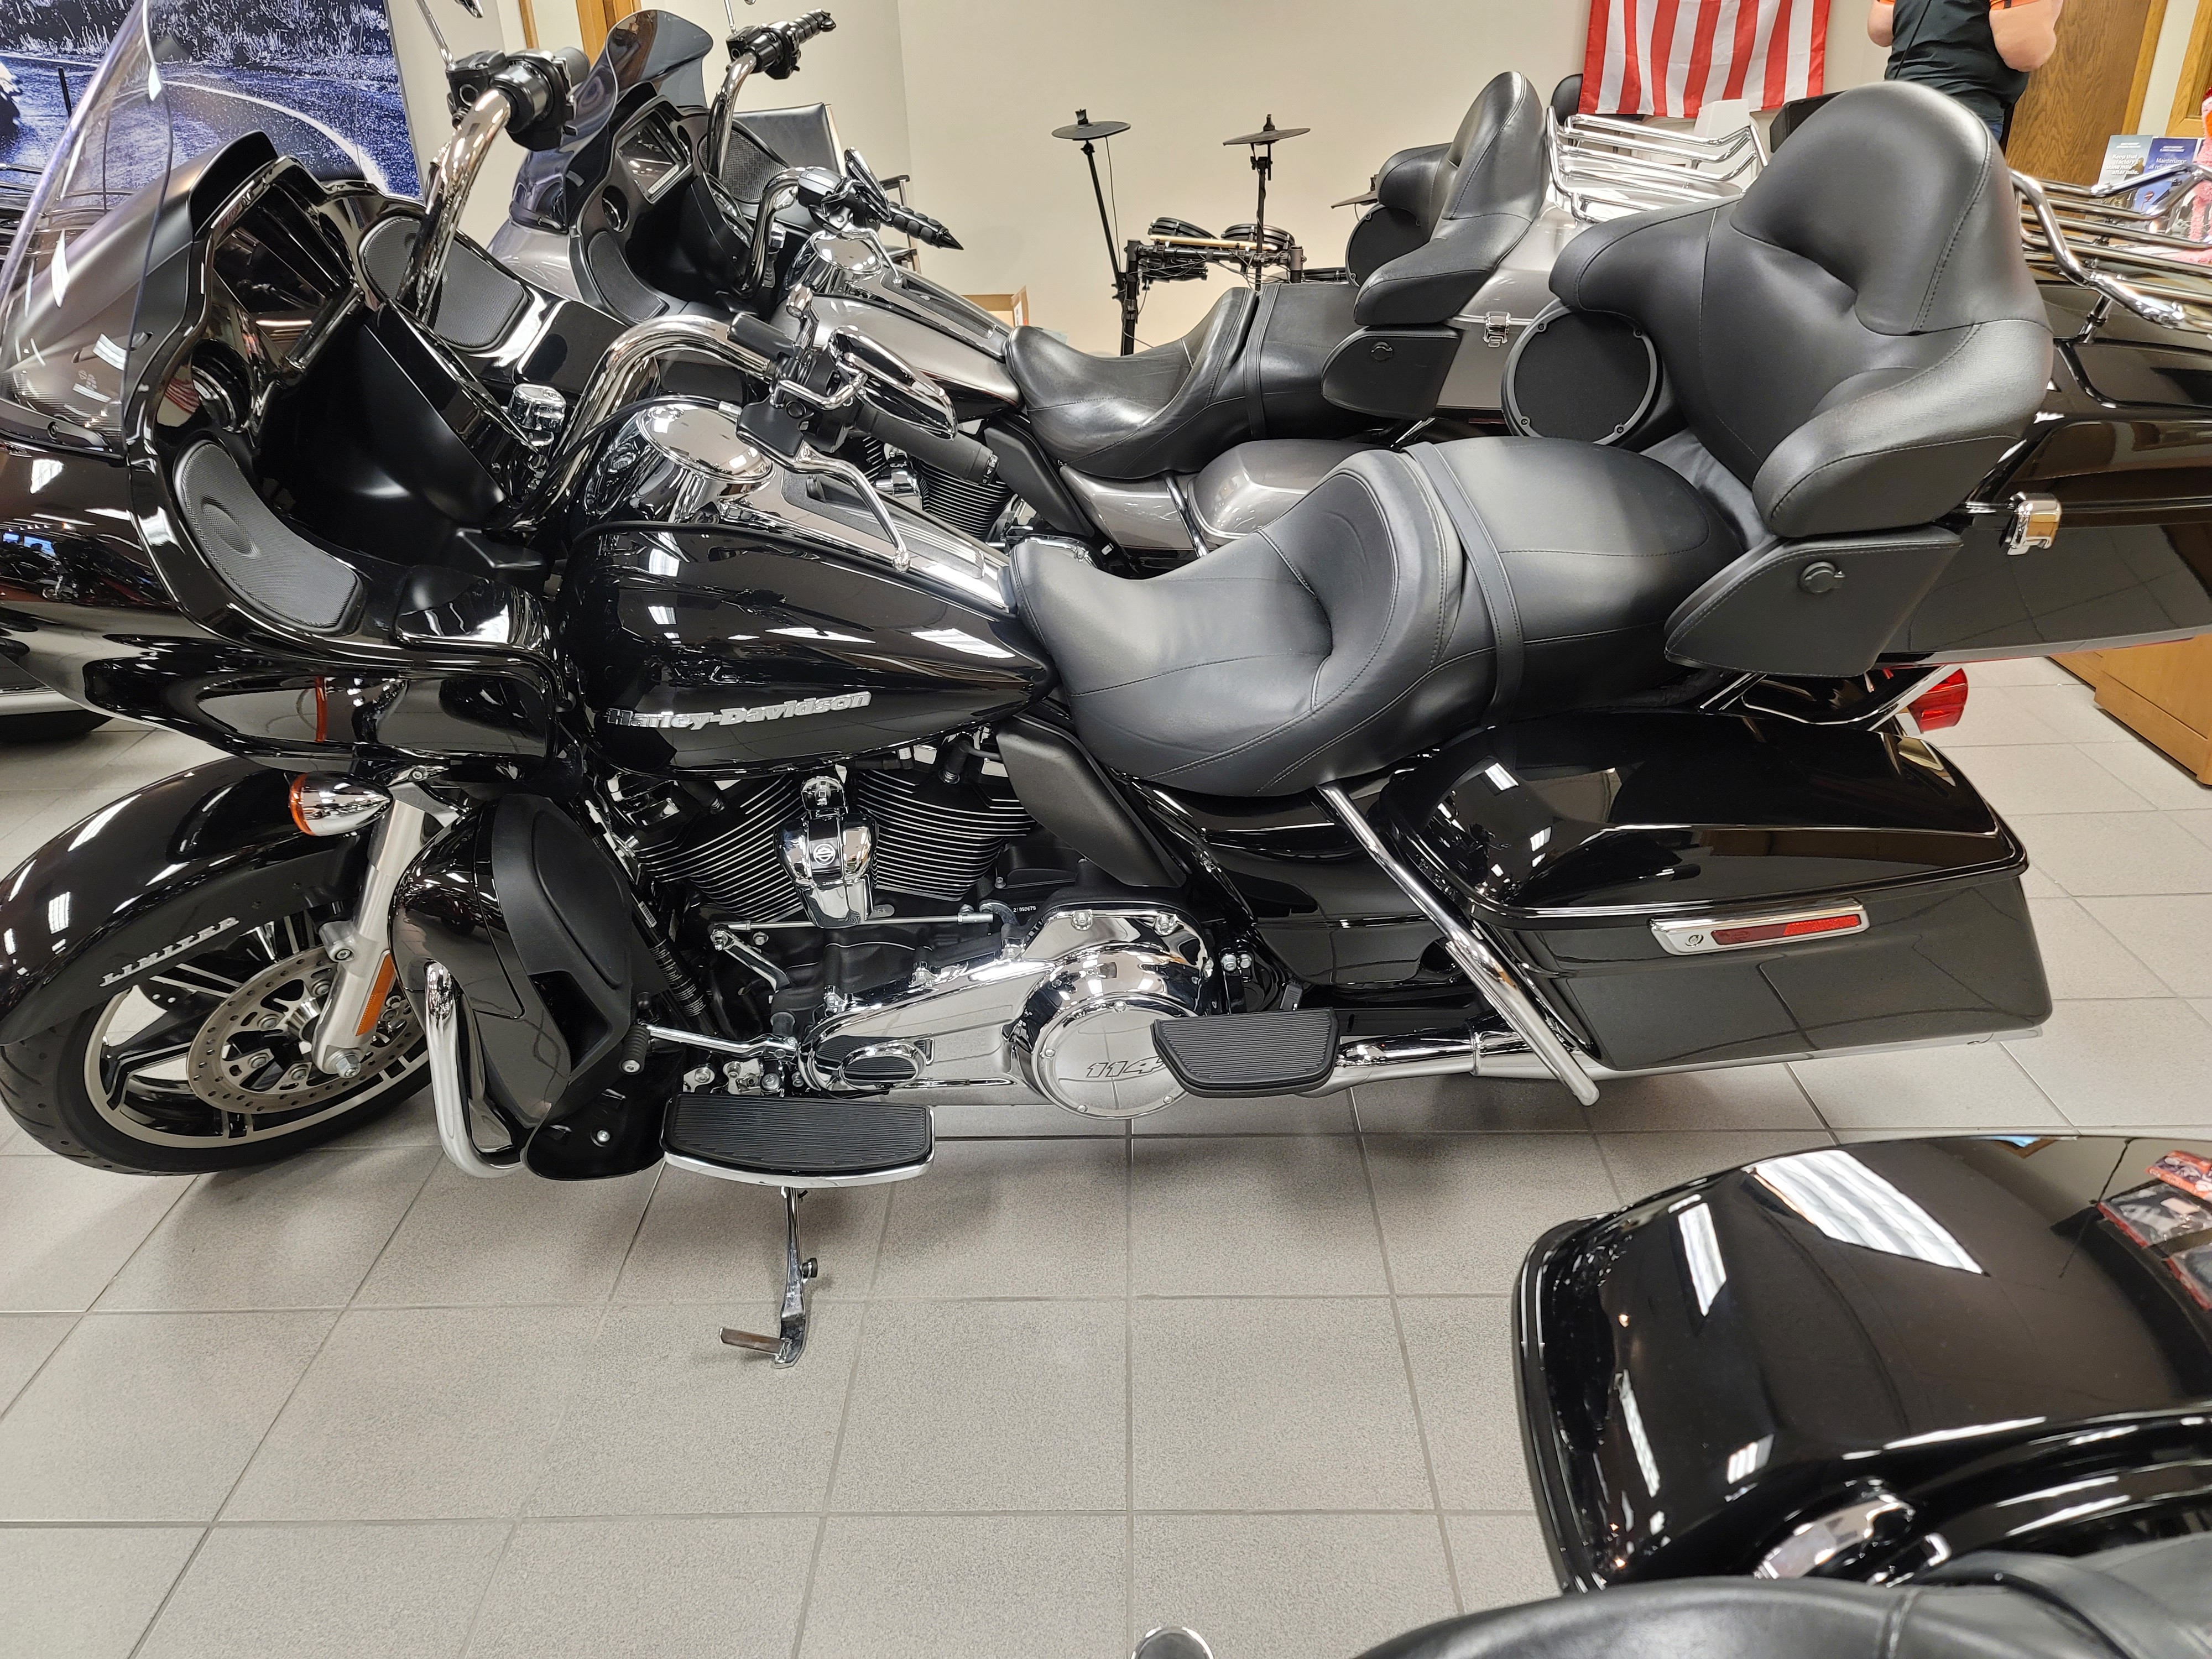 2021 Harley-Davidson Grand American Touring Road Glide Limited at Rooster's Harley Davidson